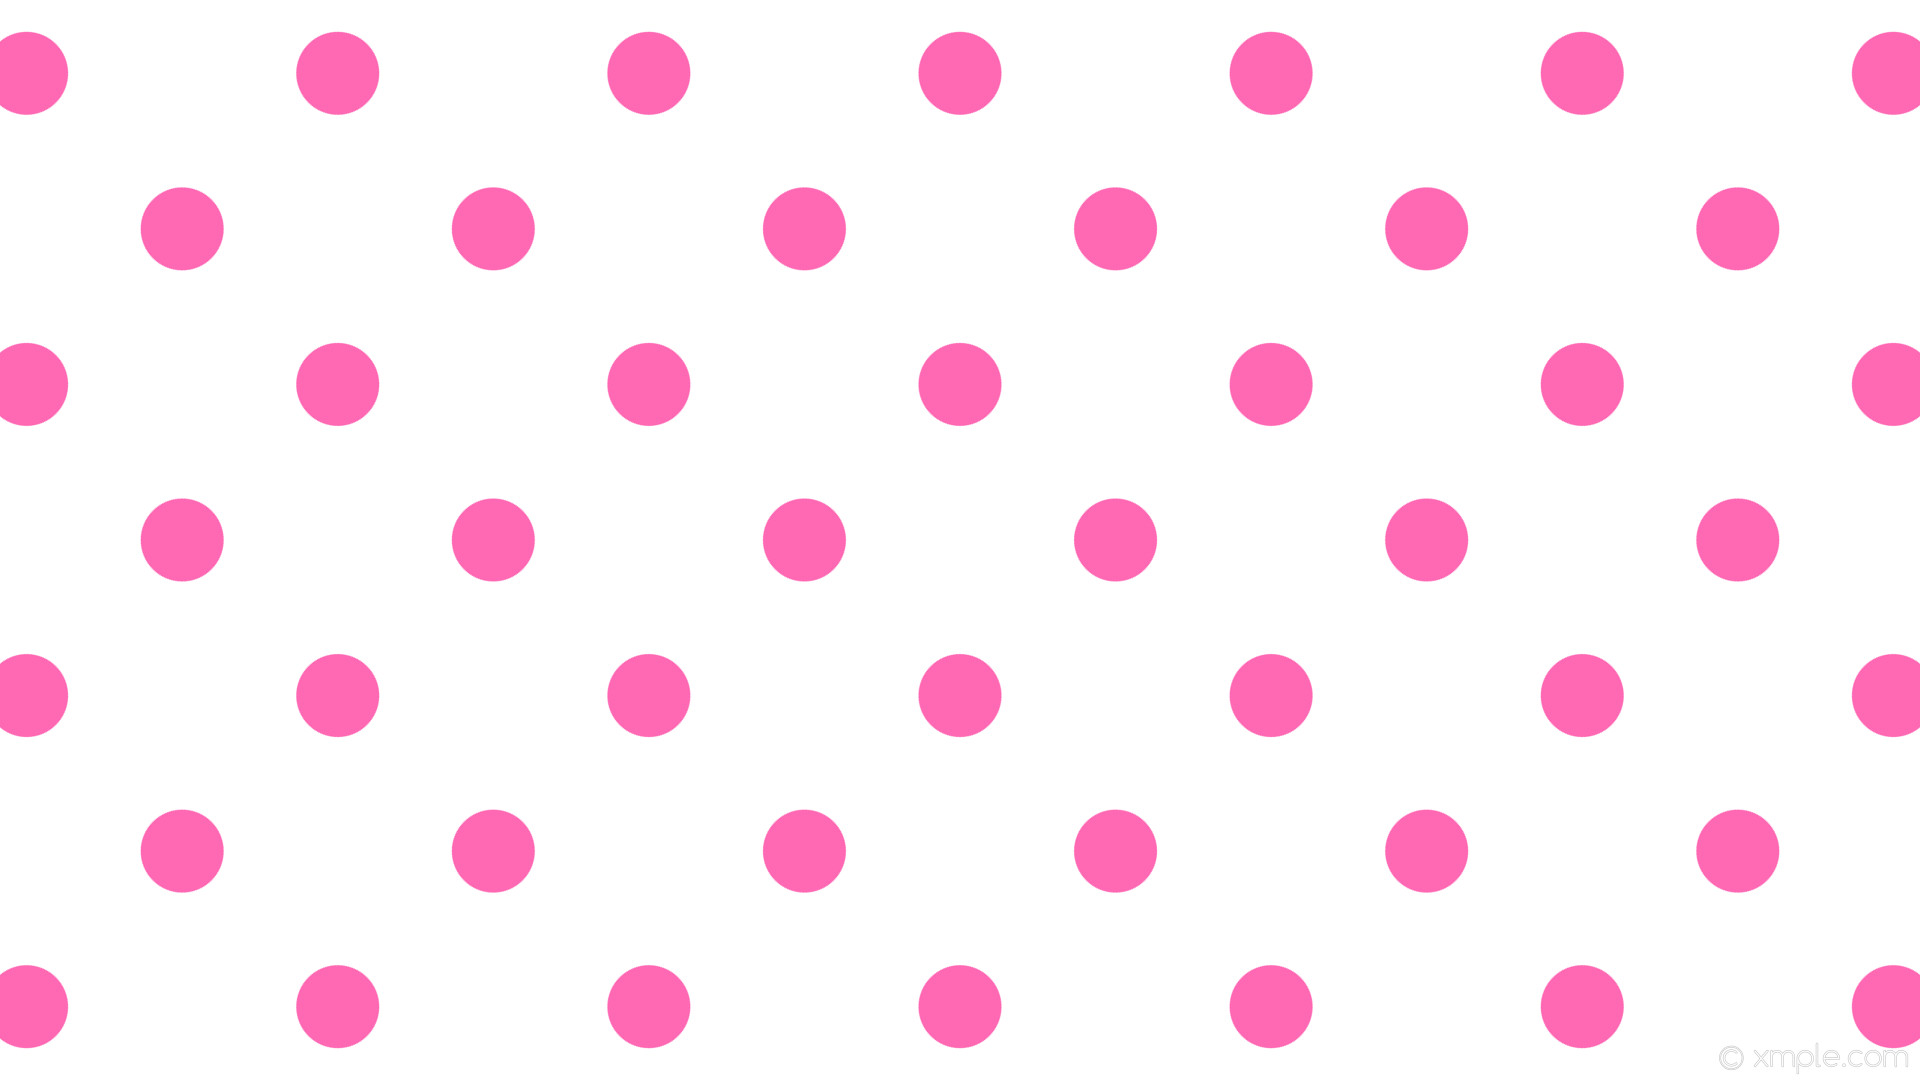 1920x1080 Polka Dots Pink And White Wallpaper Image Gallery - HCPR. Polka Dots Pink  And White Wallpaper Image Gallery HCPR